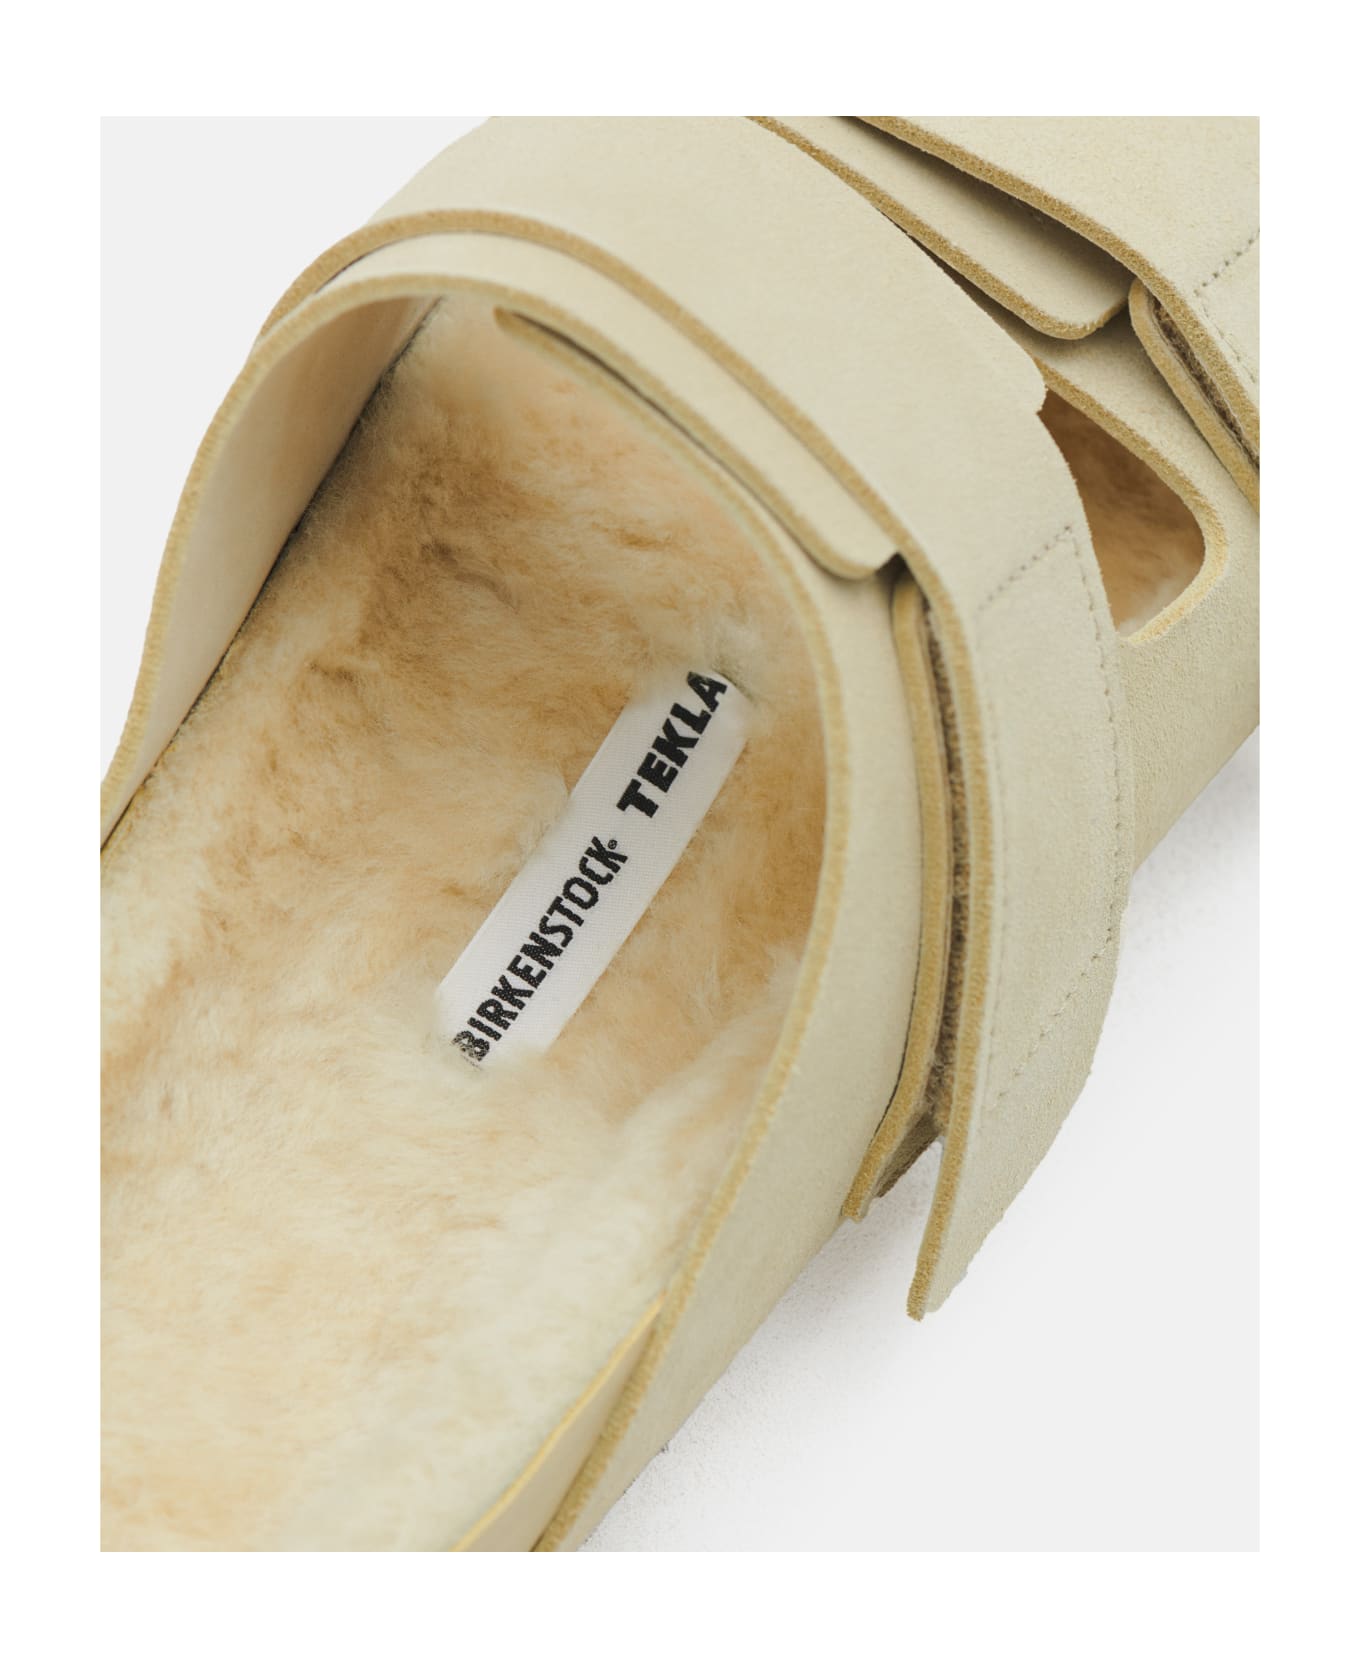 Birkenstock Uji Suede And Leather Slippers - STRAW フラットシューズ